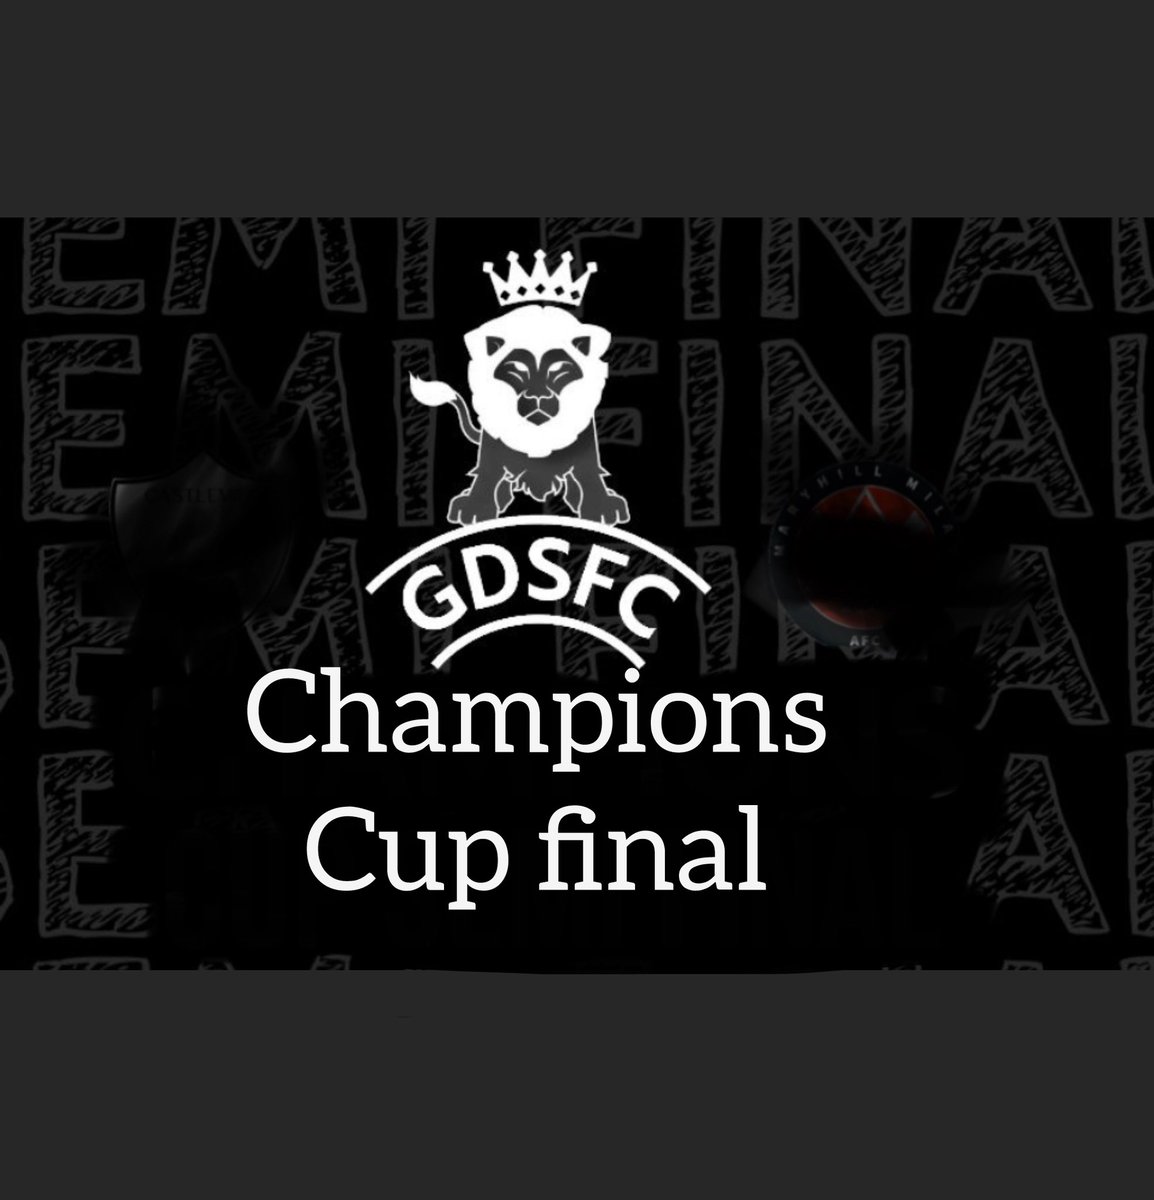 . ⚽️GDSFC super Sunday⚽️ @GDSFC2008 Champions cup finalist The final spots have been booked after 2 semi finals today and congratulations to @bonomyfc2020 & @CastlemilkFc on reaching final Keep up to date with GDSFC at website ⬇️ gdsfc.co.uk/home/ Footy focus blog…